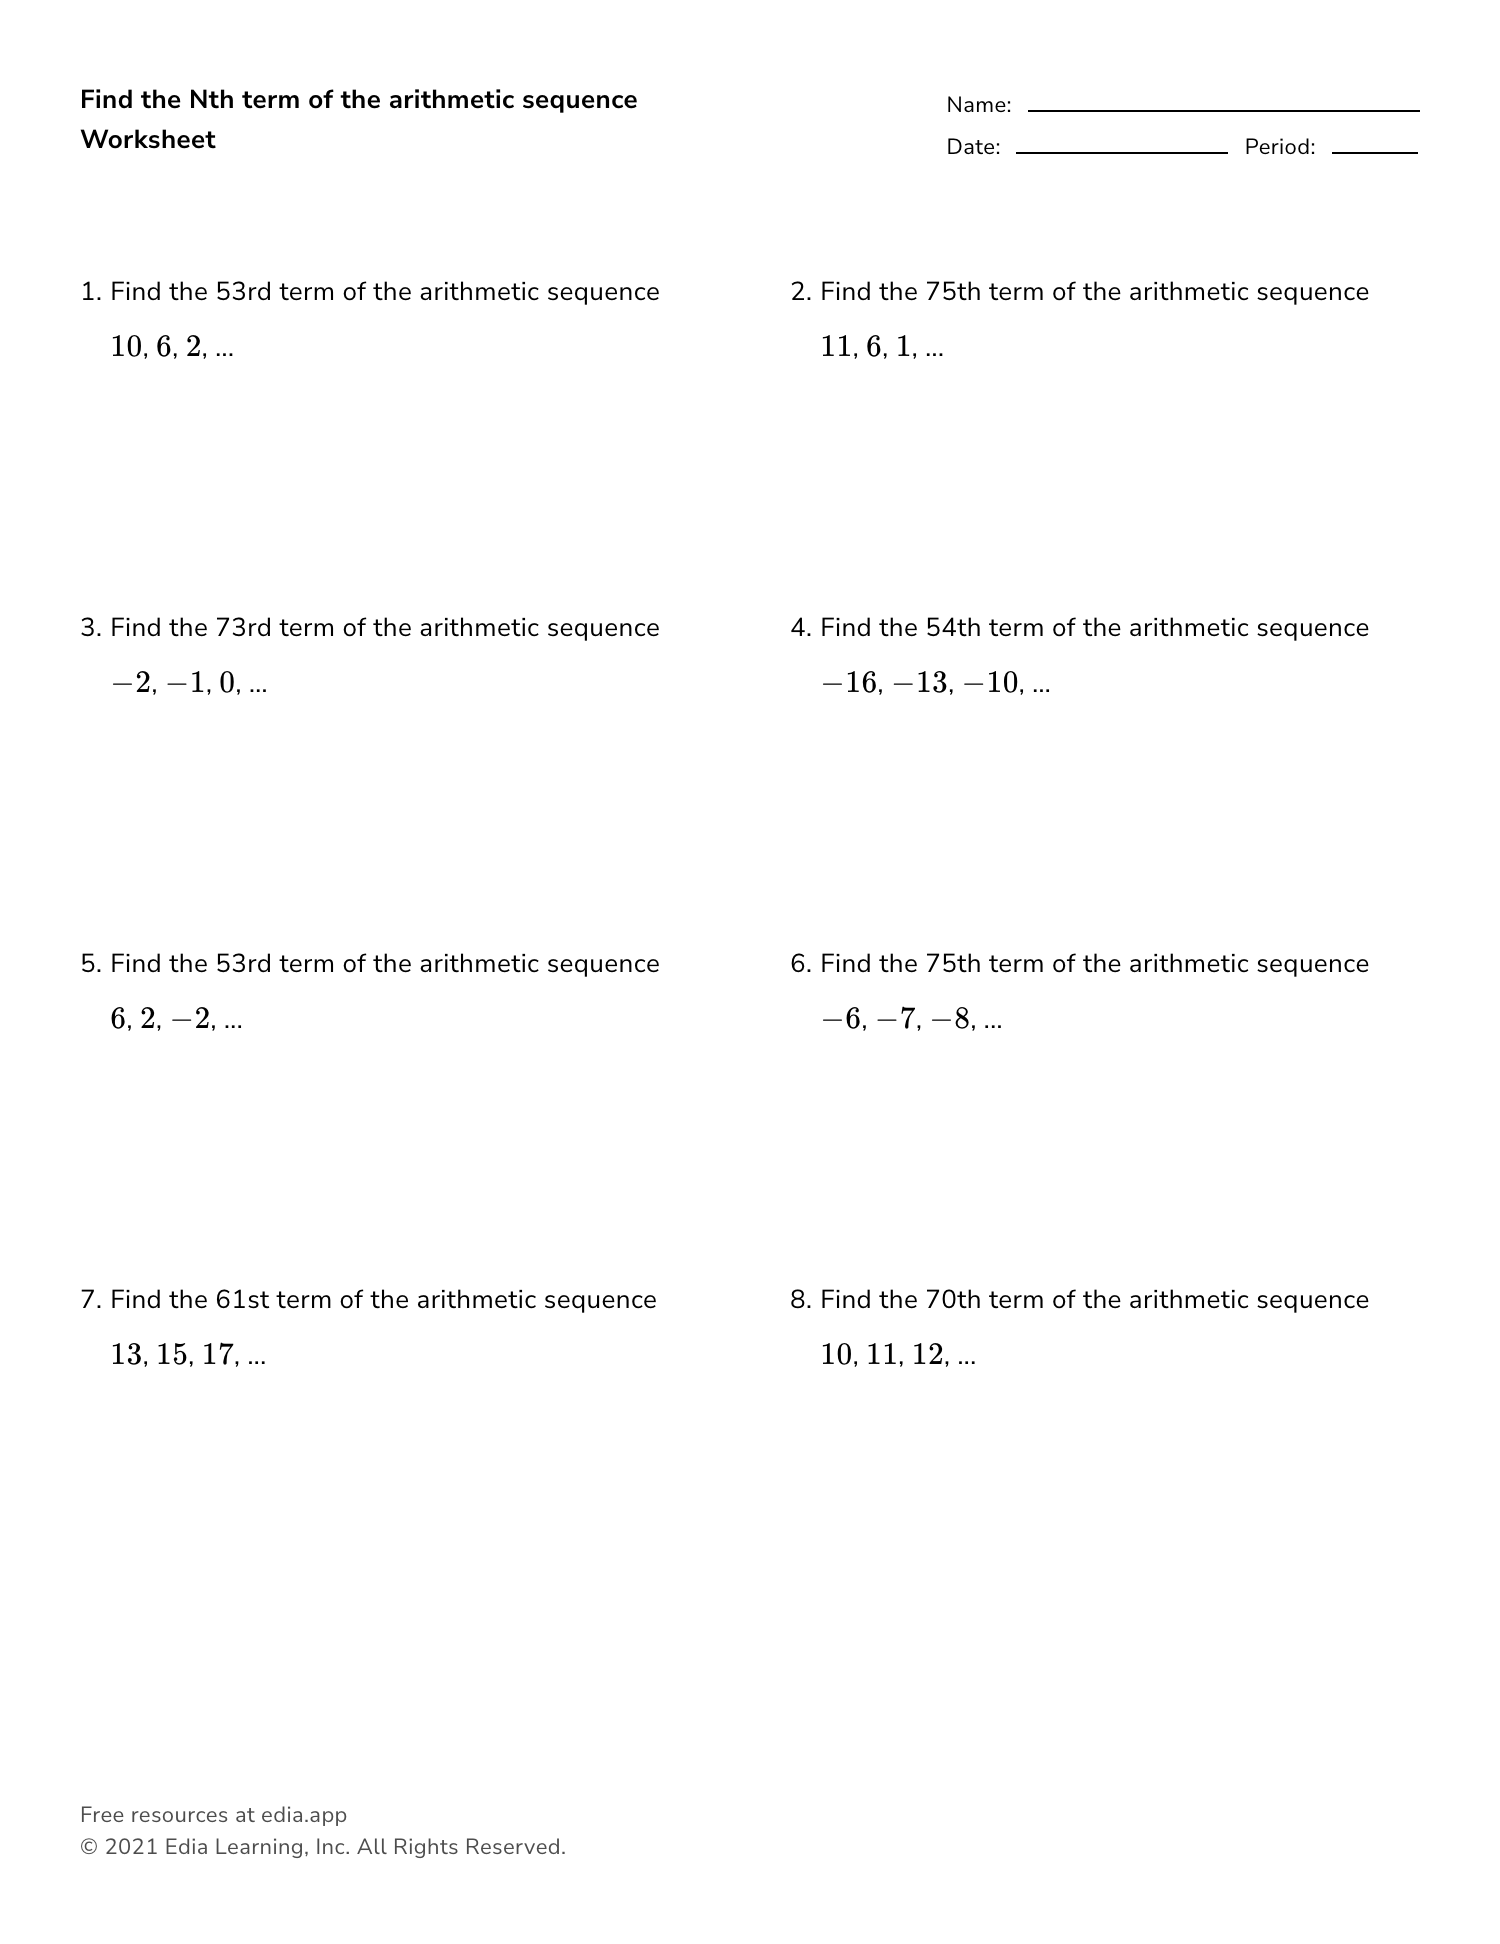 Find The Nth Term Of The Arithmetic Sequence - Worksheet Regarding Arithmetic Sequence Worksheet Algebra 1